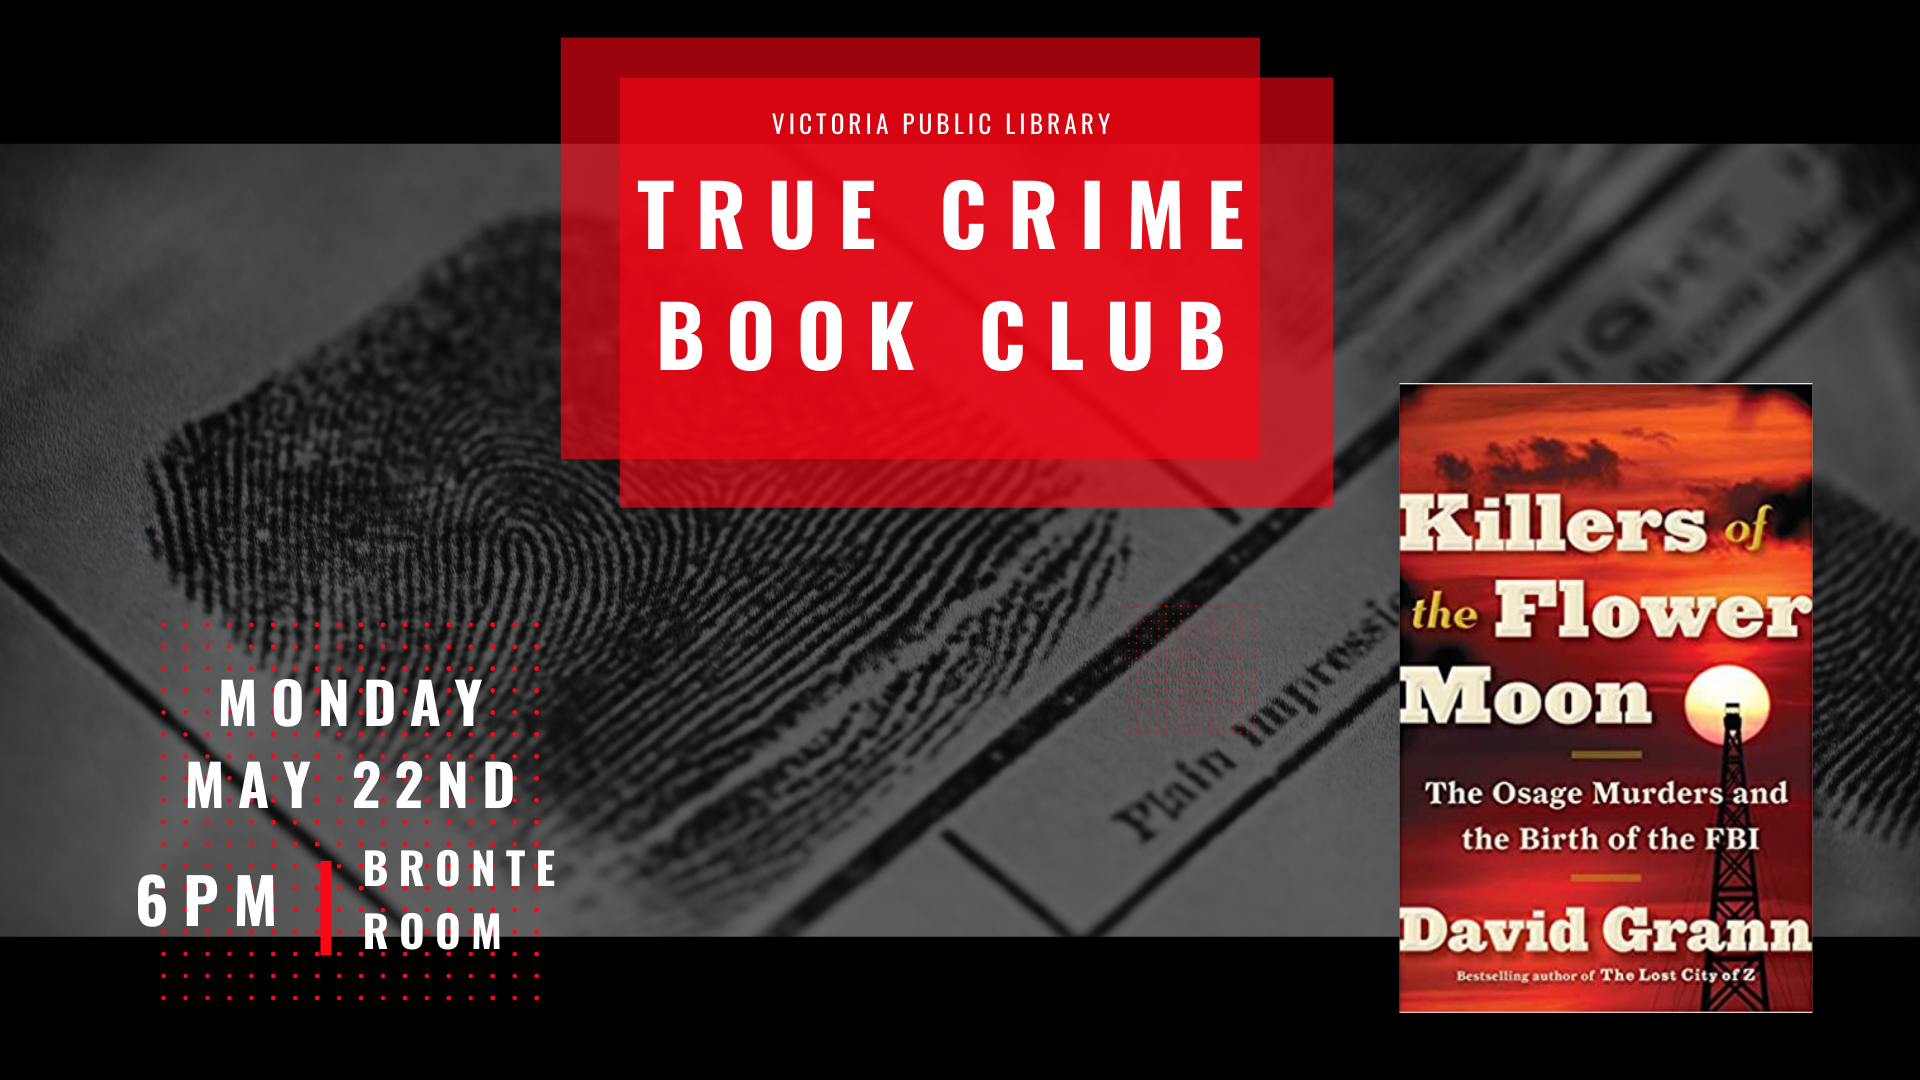 True Crime Book Club, May 22nd at 6:00pm